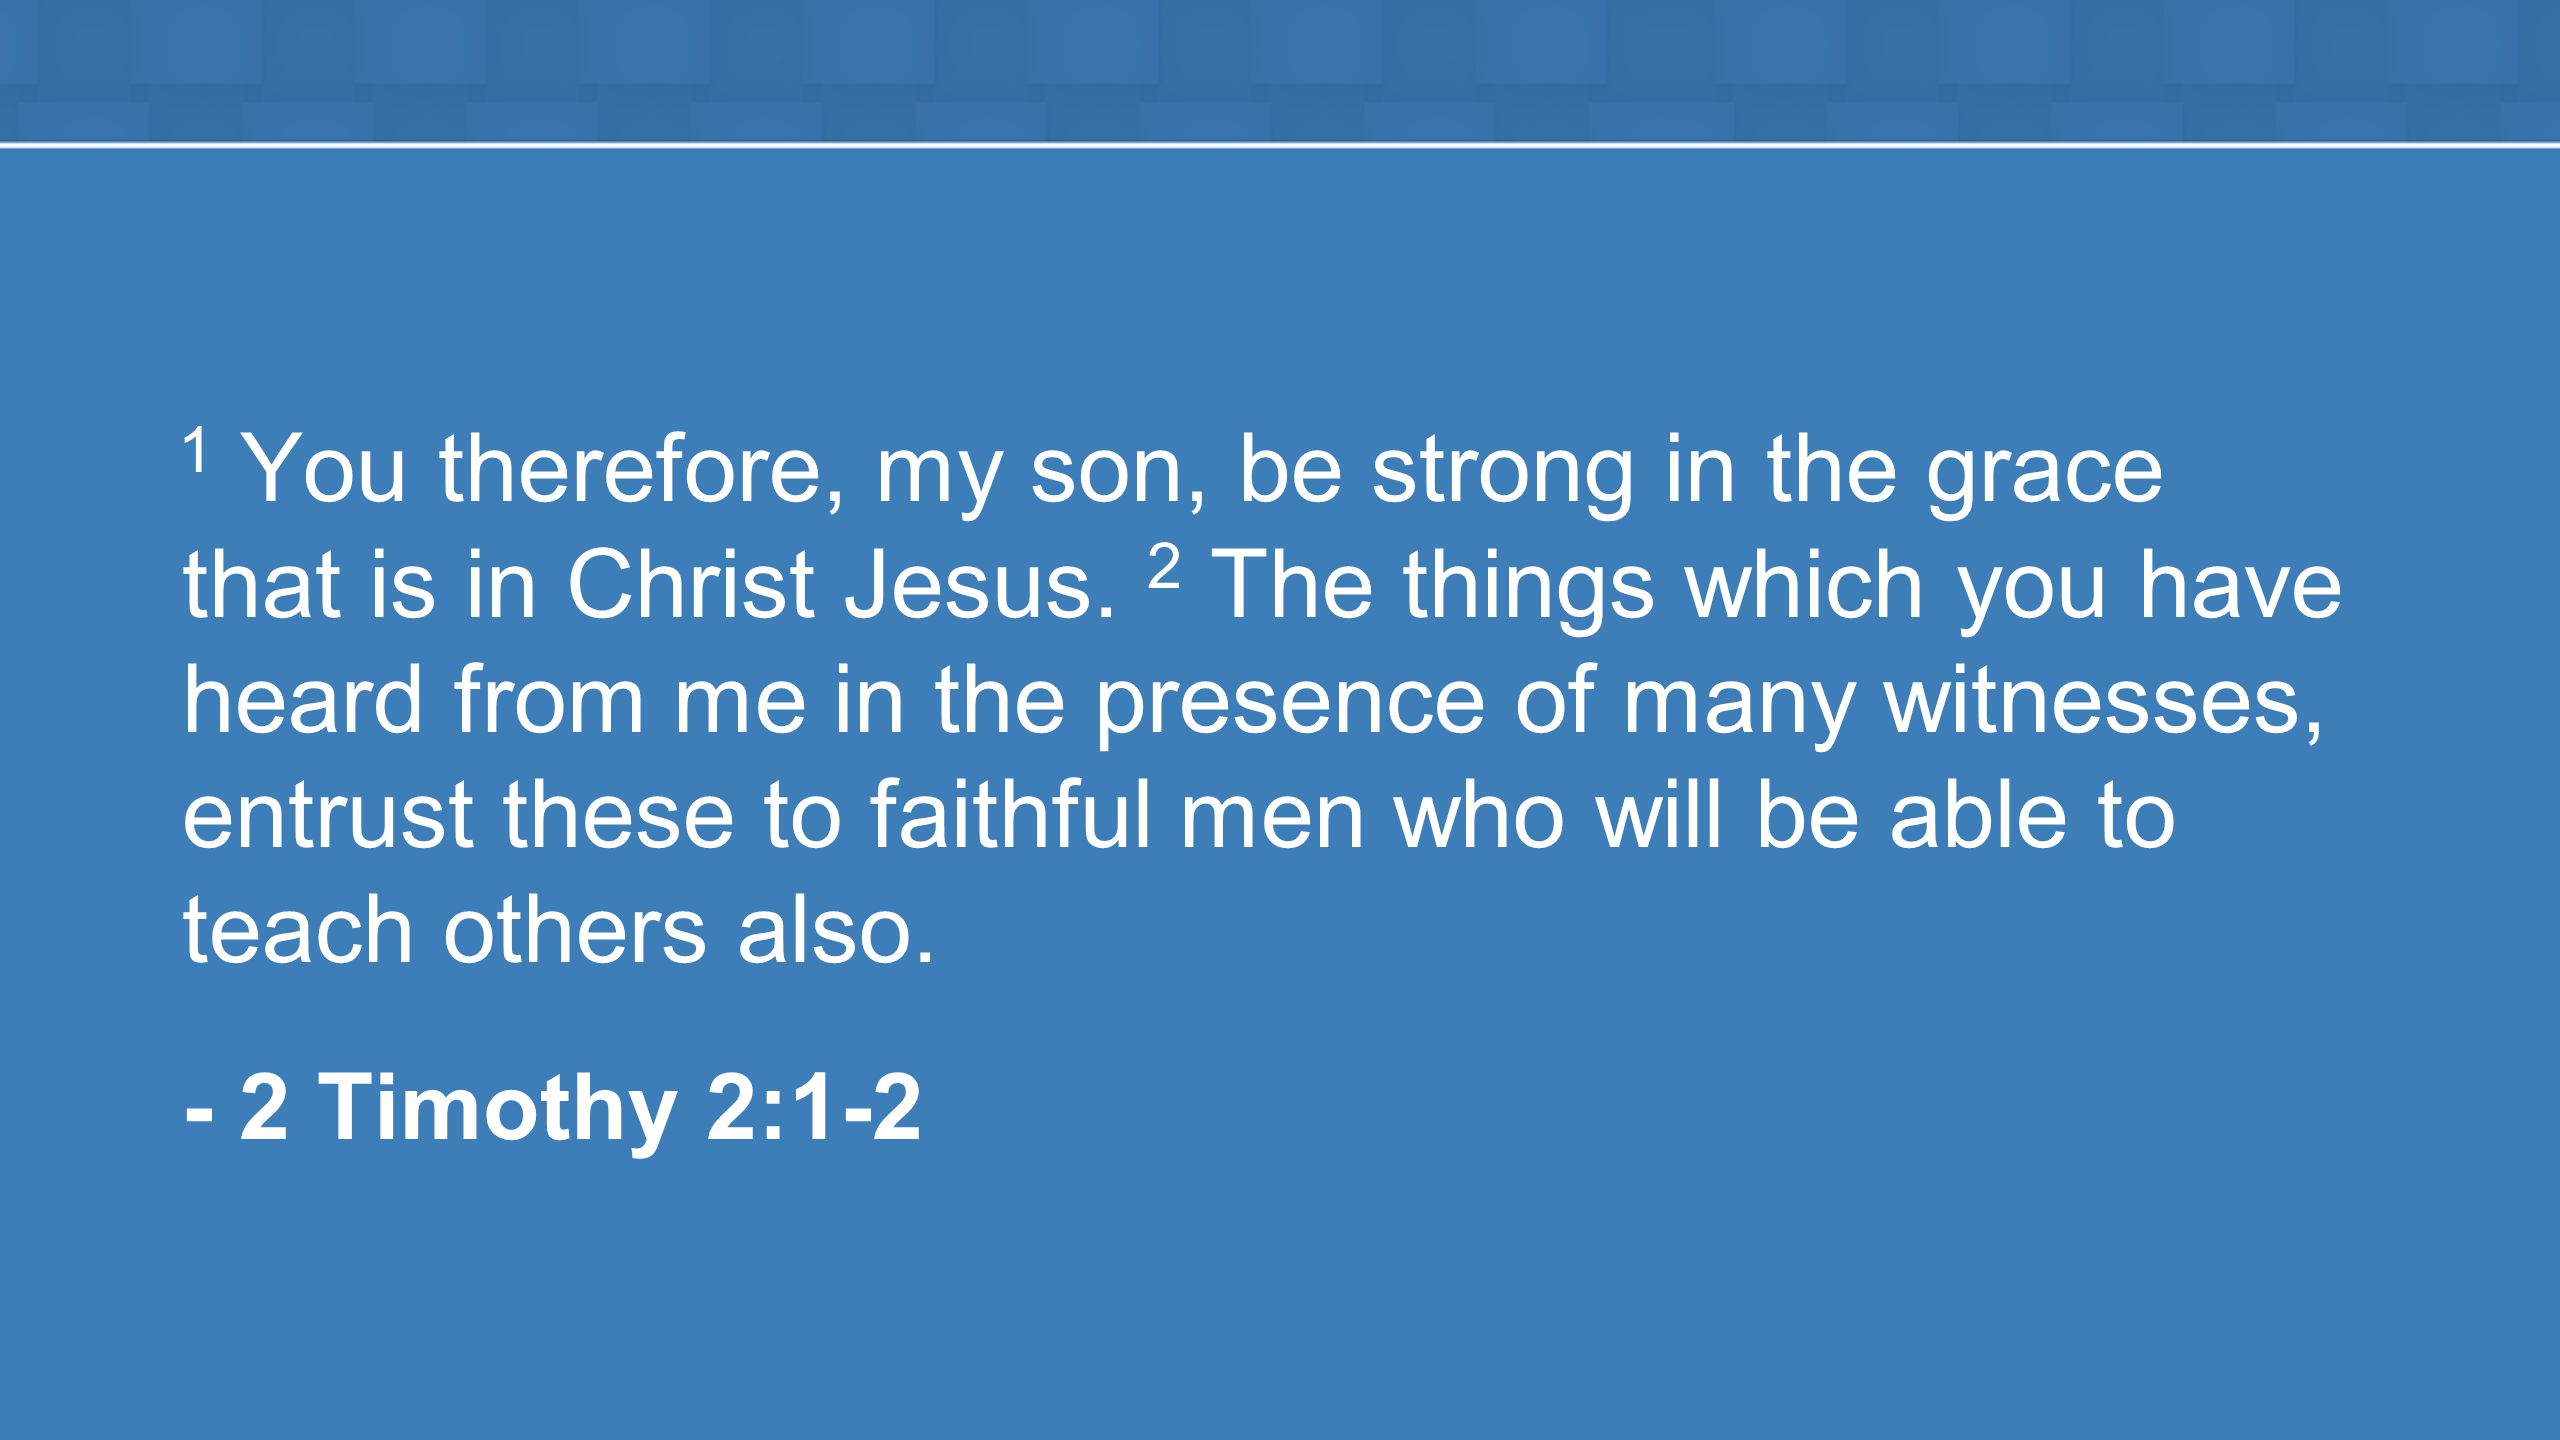 1 You therefore, my son, be strong in the grace that is in Christ Jesus.